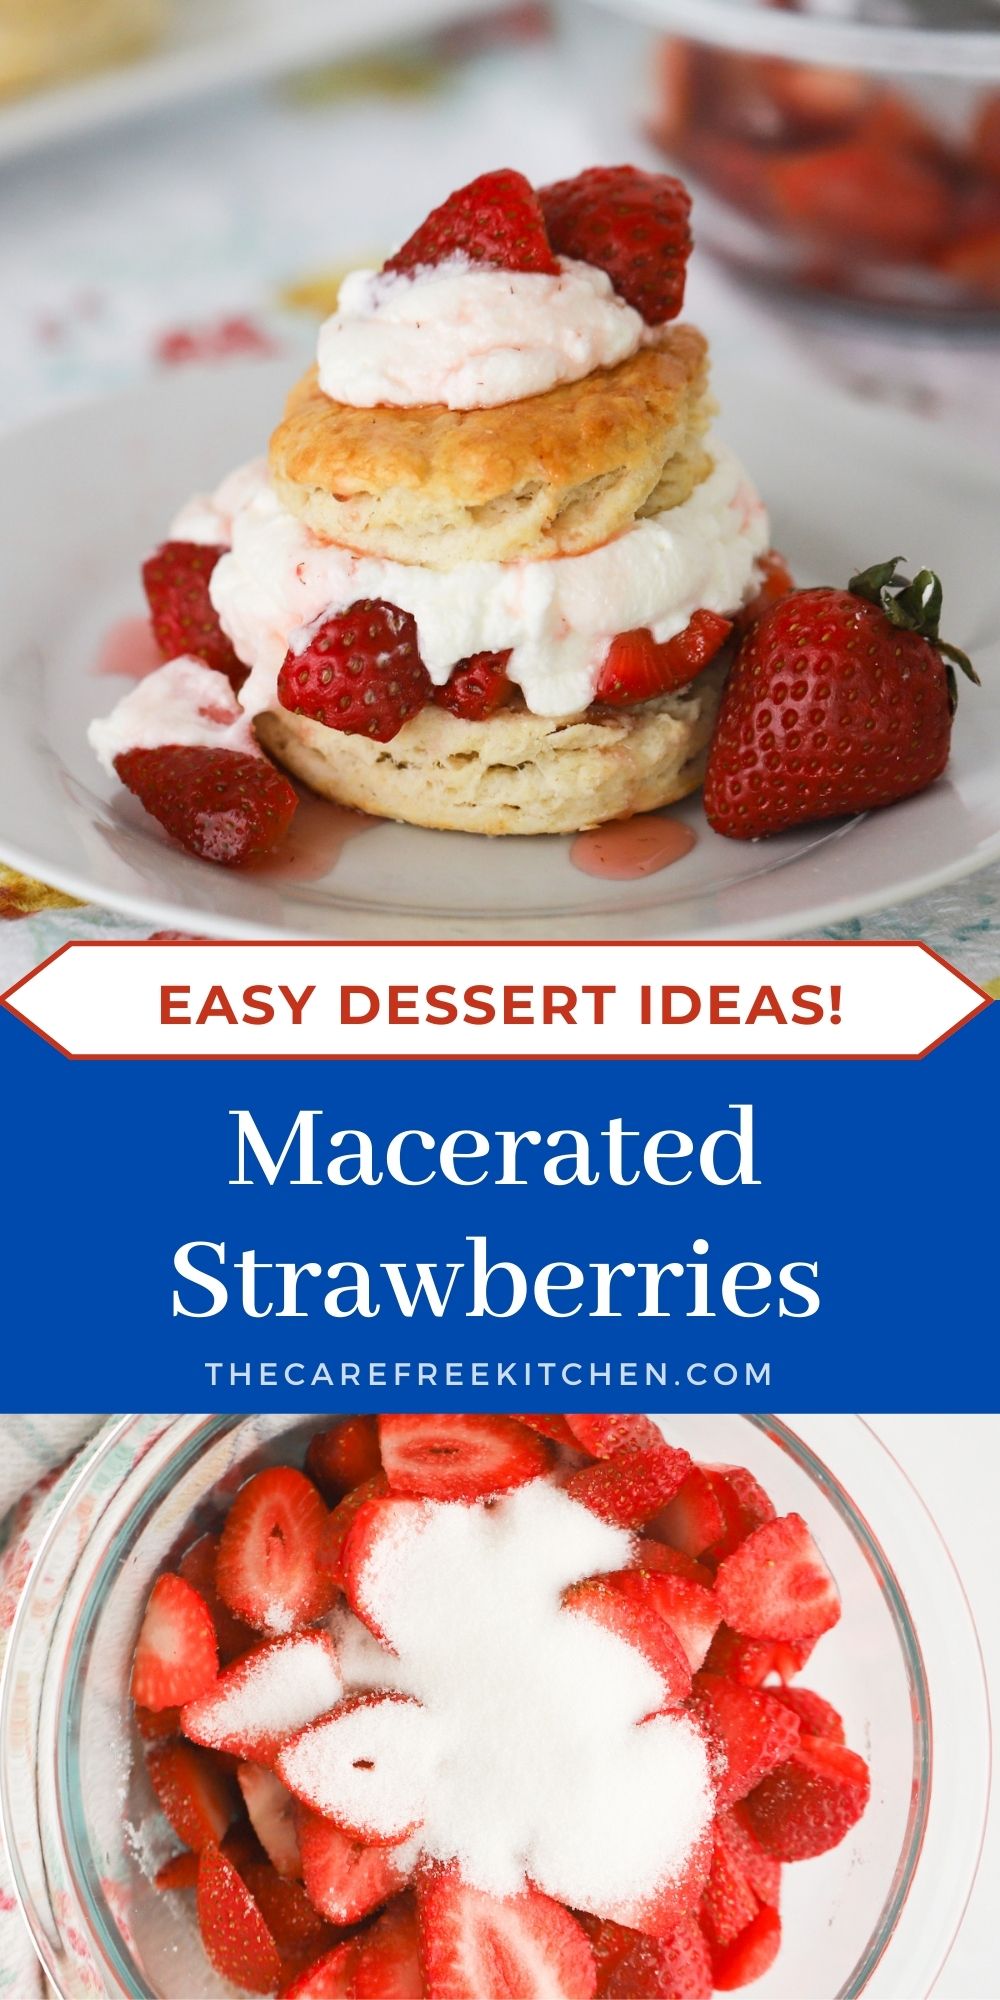 Macerated Strawberries - The Carefree Kitchen